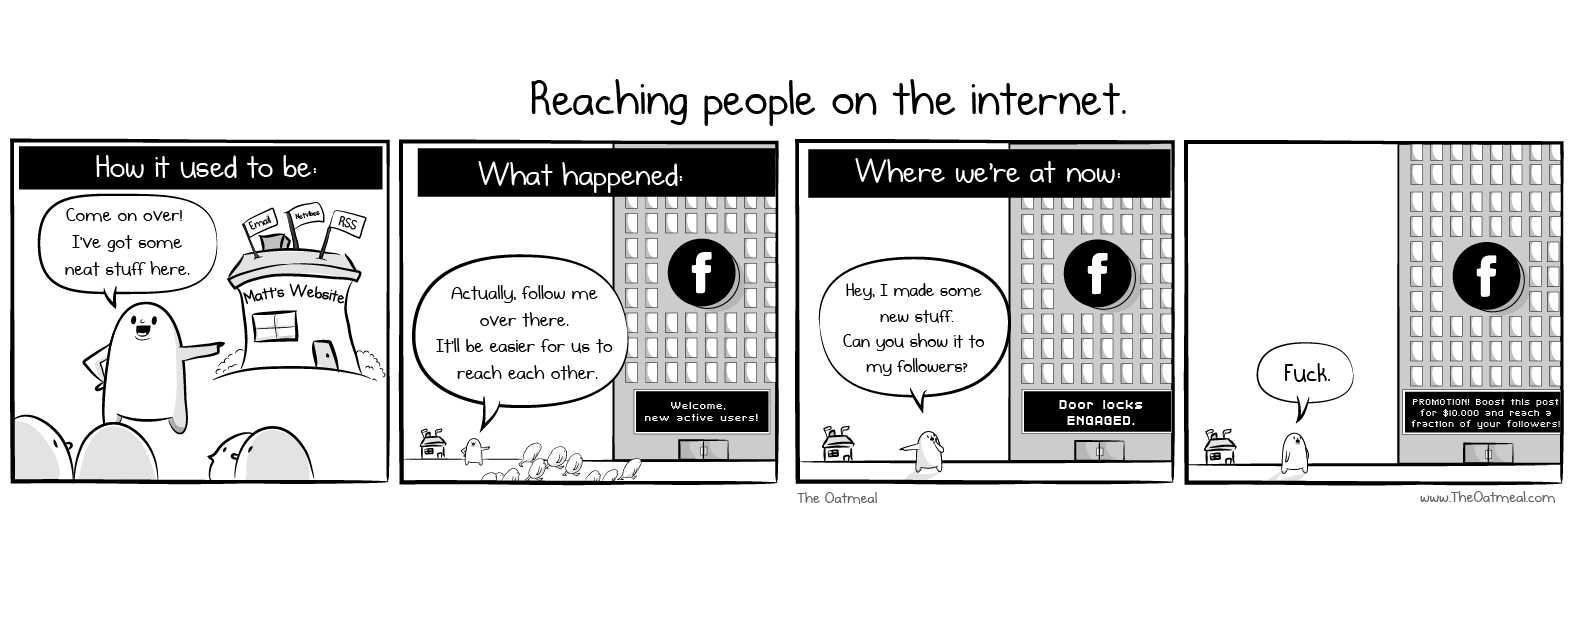 a slightly rearranged version of The Oatmeal's (linked) comic strip about Facebook